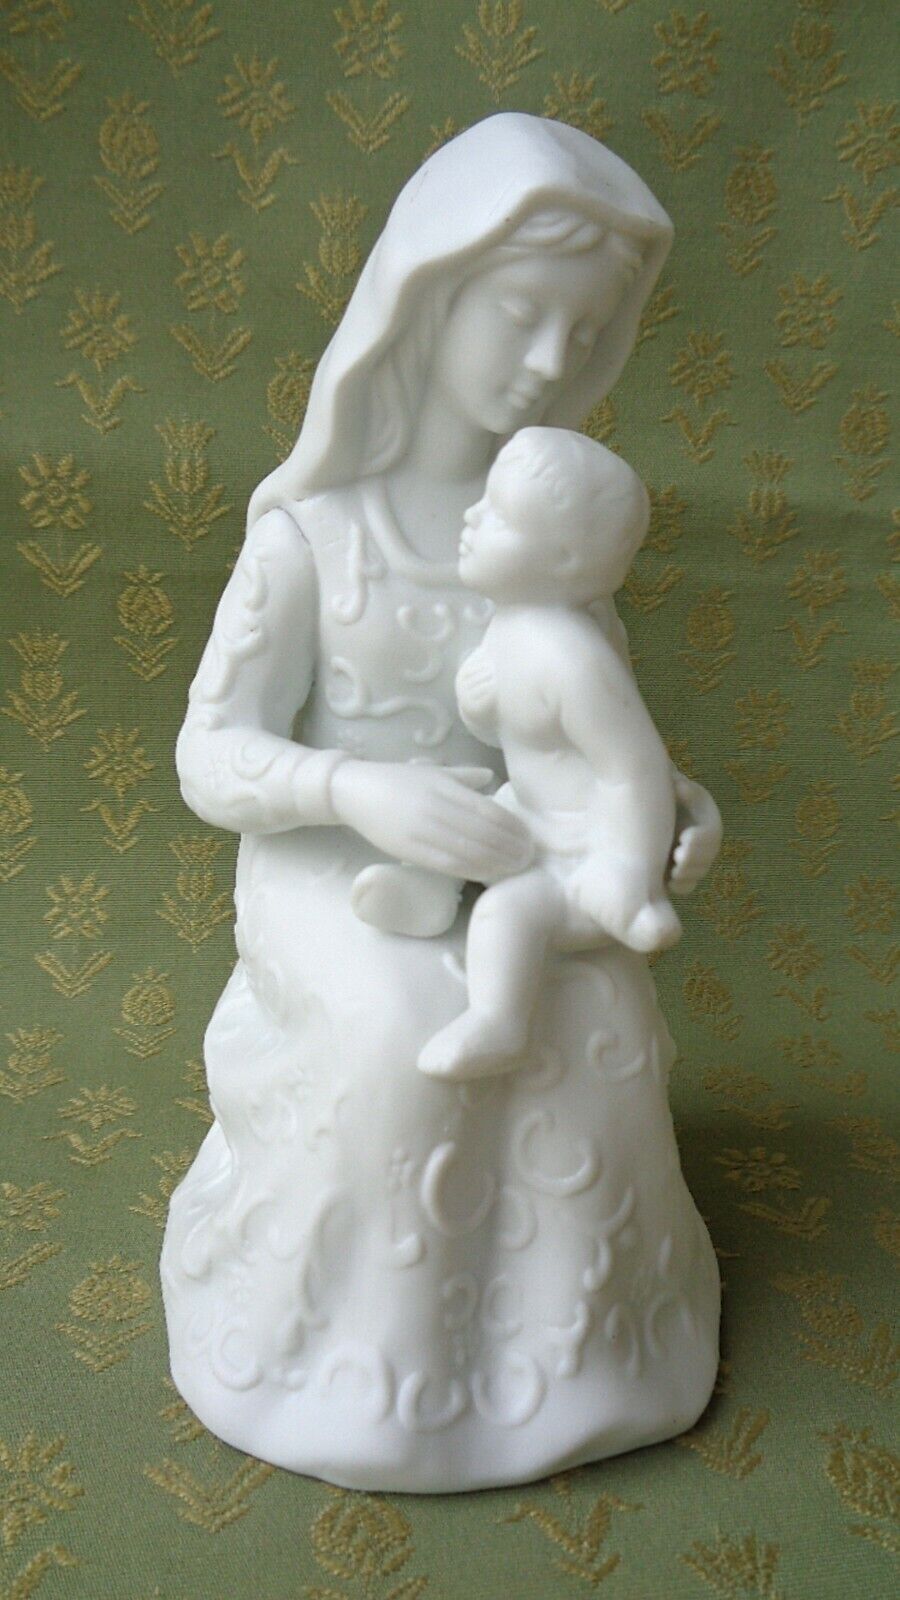 Parian Ware Madonna and Baby Jesus Figurine - Mother and Child - Vintage RARE